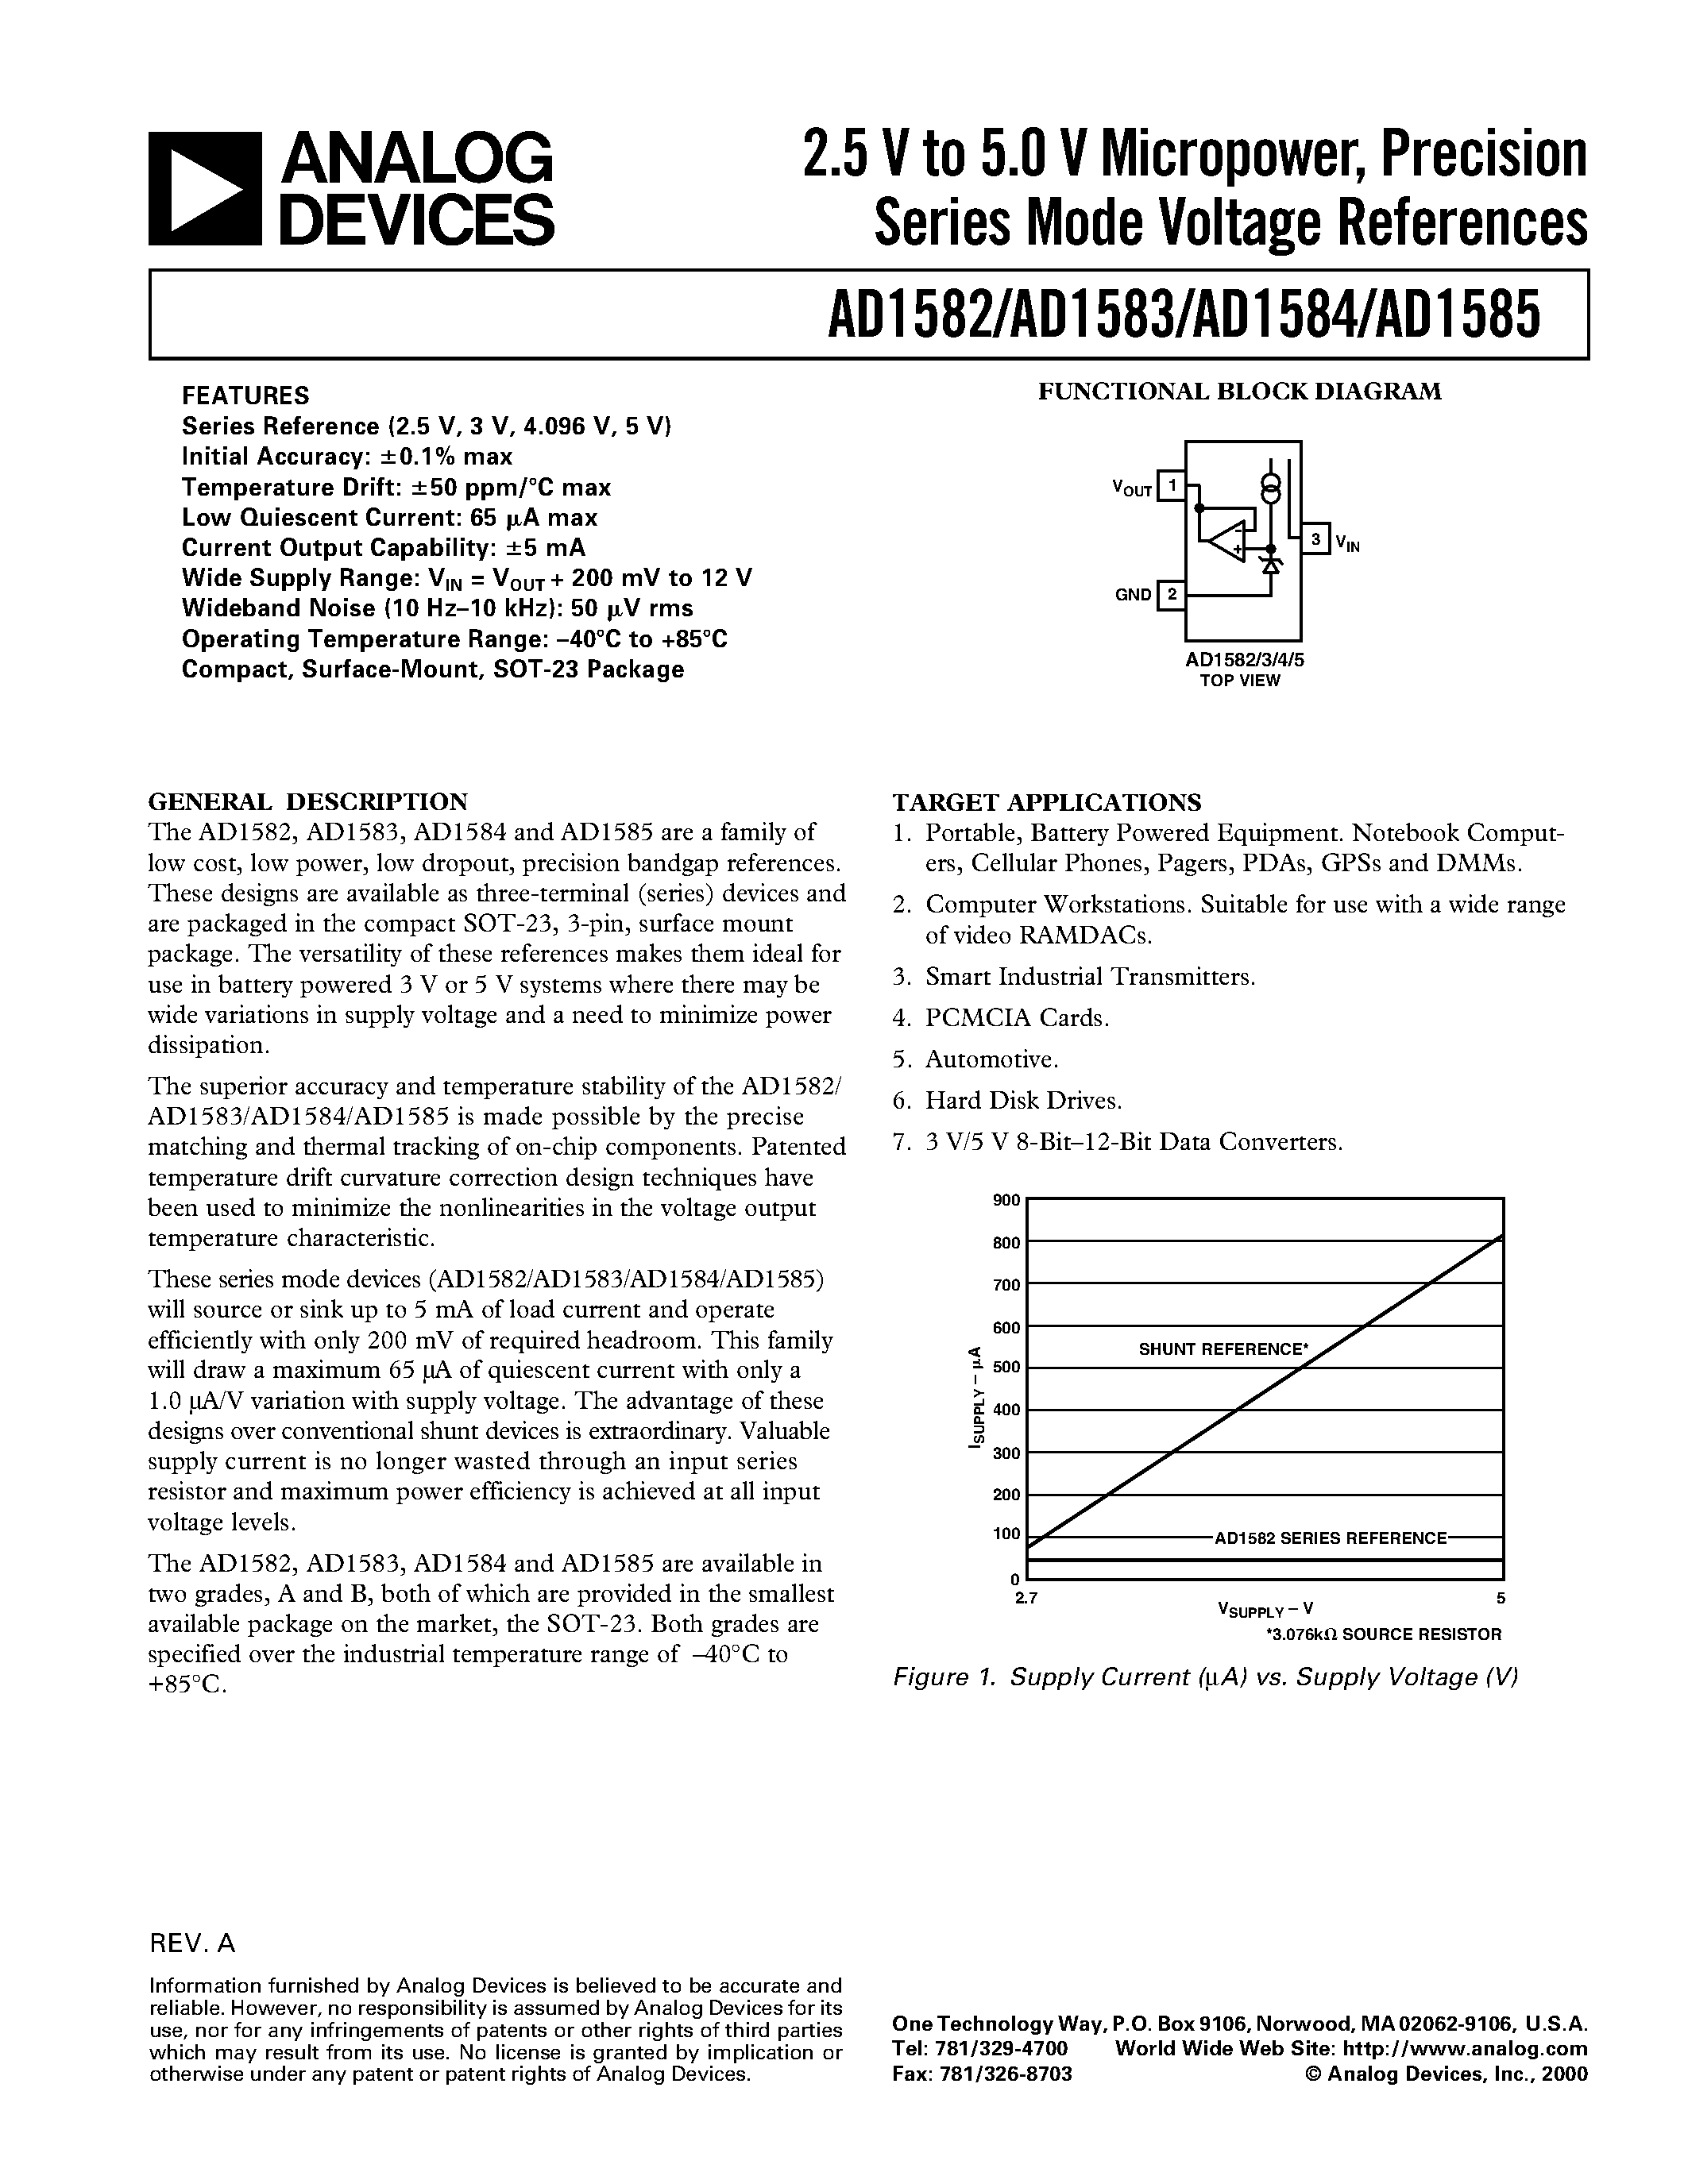 Даташит AD1585 - 2.5 V to 5.0 V Micropower/ Precision Series Mode Voltage References страница 1